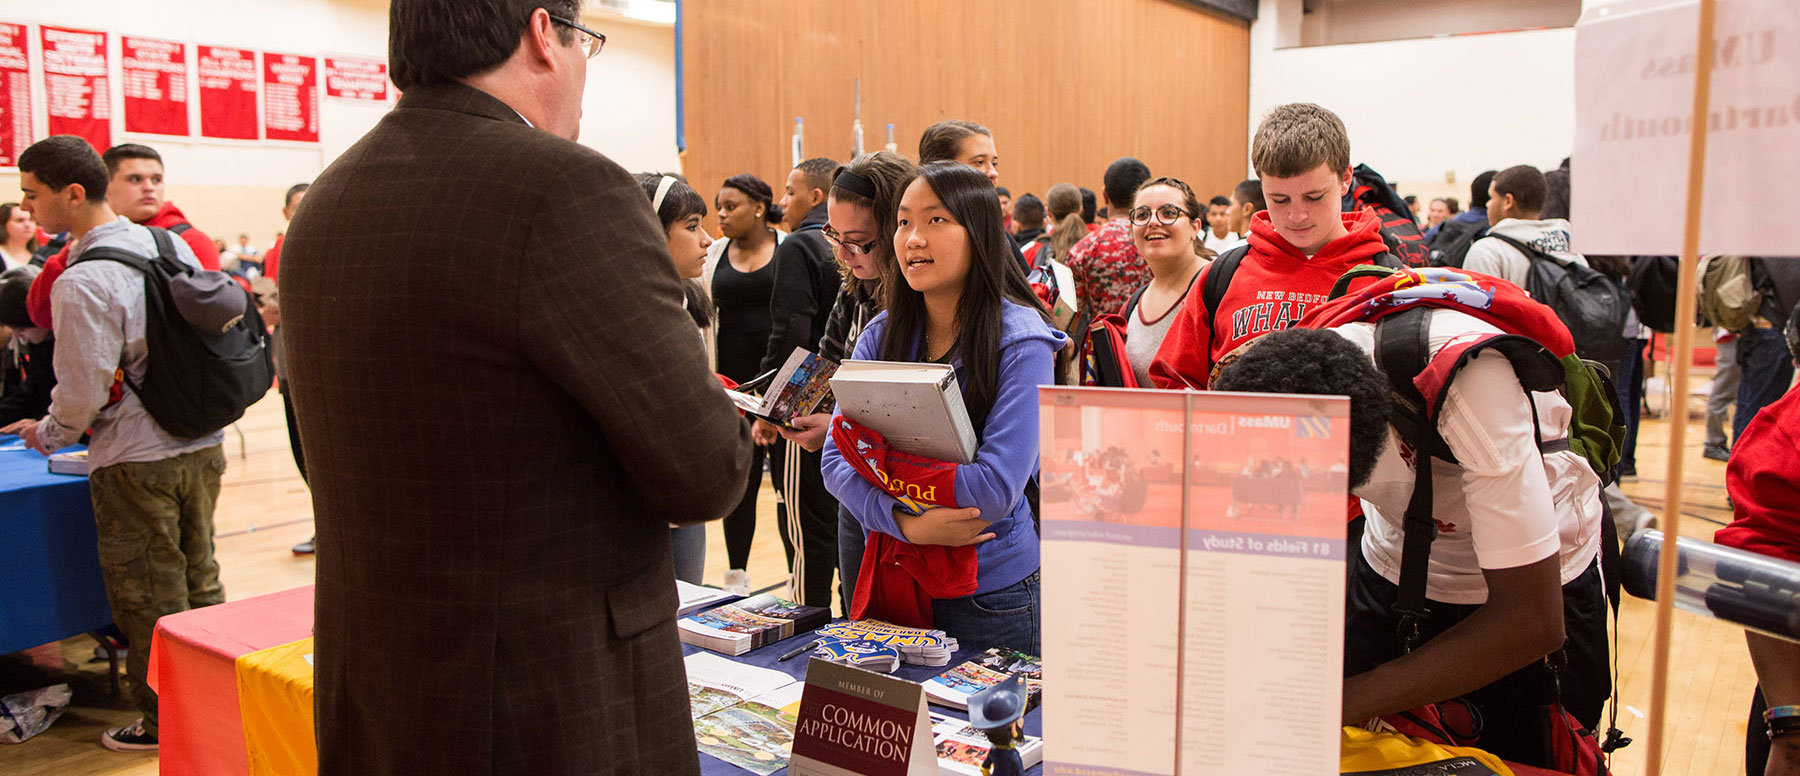 Students at New Bedford High School talk to admissions counselors at Go Higher fair in 2014